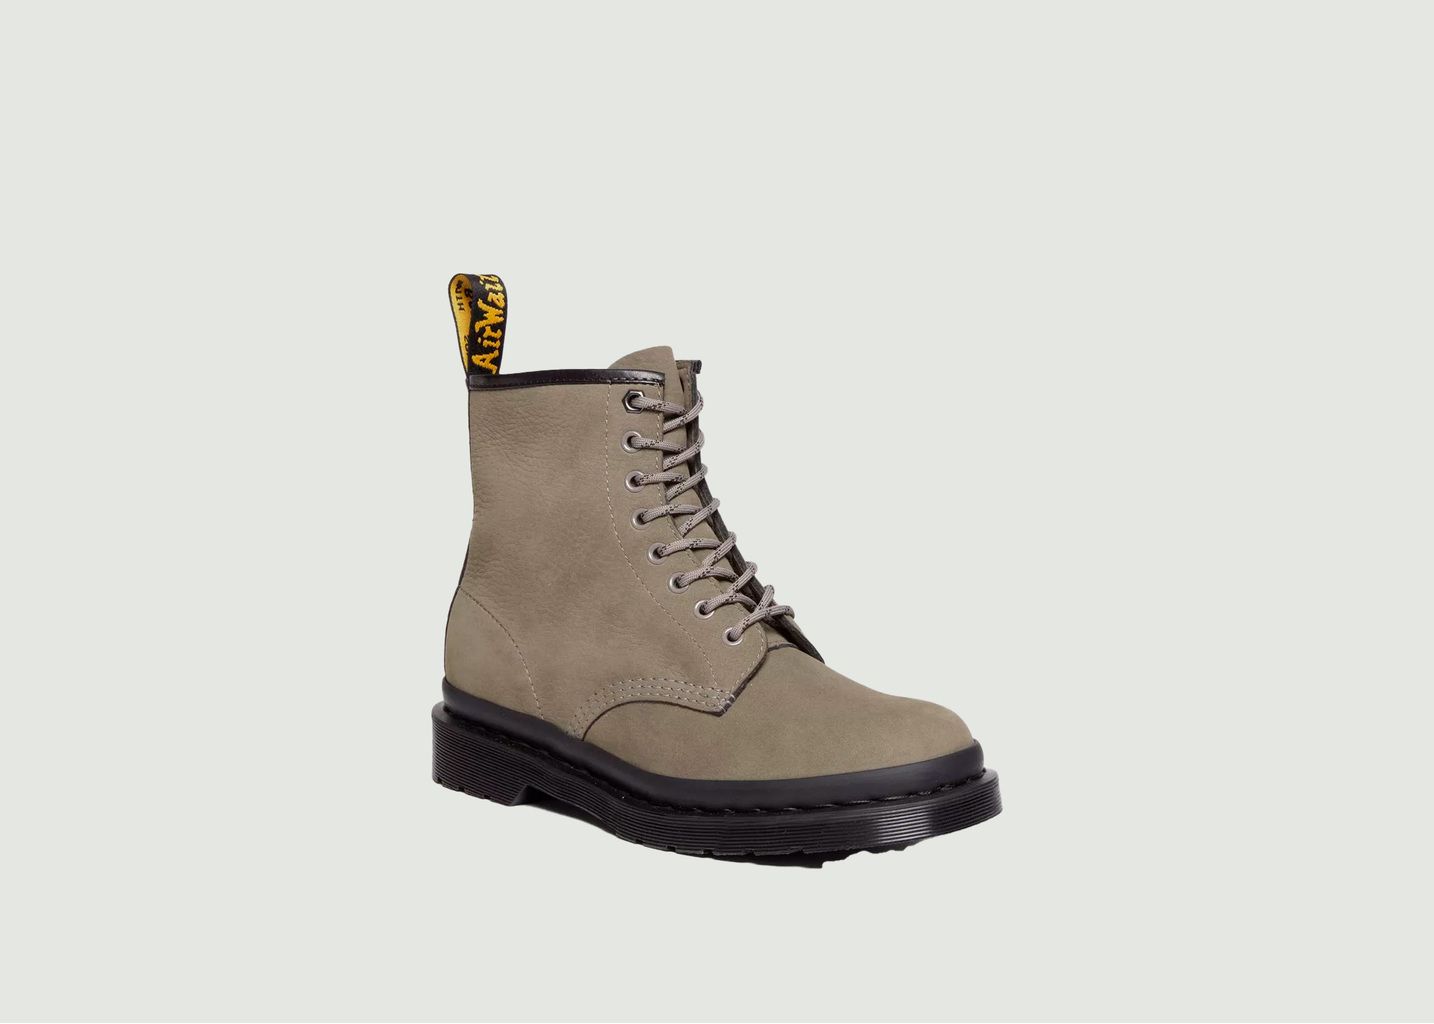 Bootes 1460 Pascal in suede  - Dr. Martens